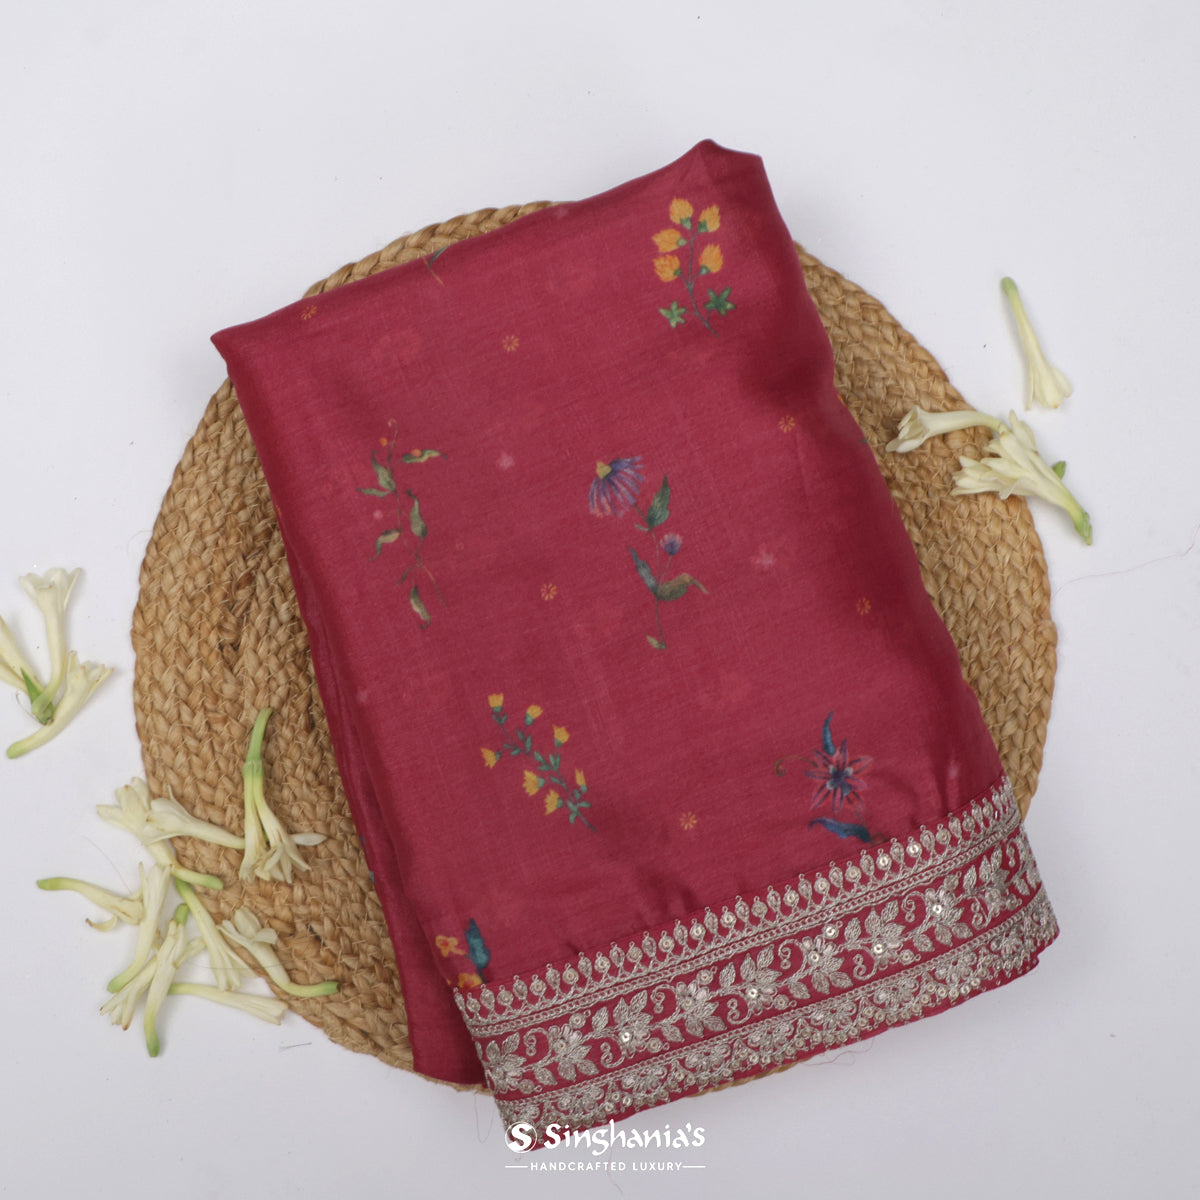 Hibiscus Red Printed Tussar Saree With Embroidery Border